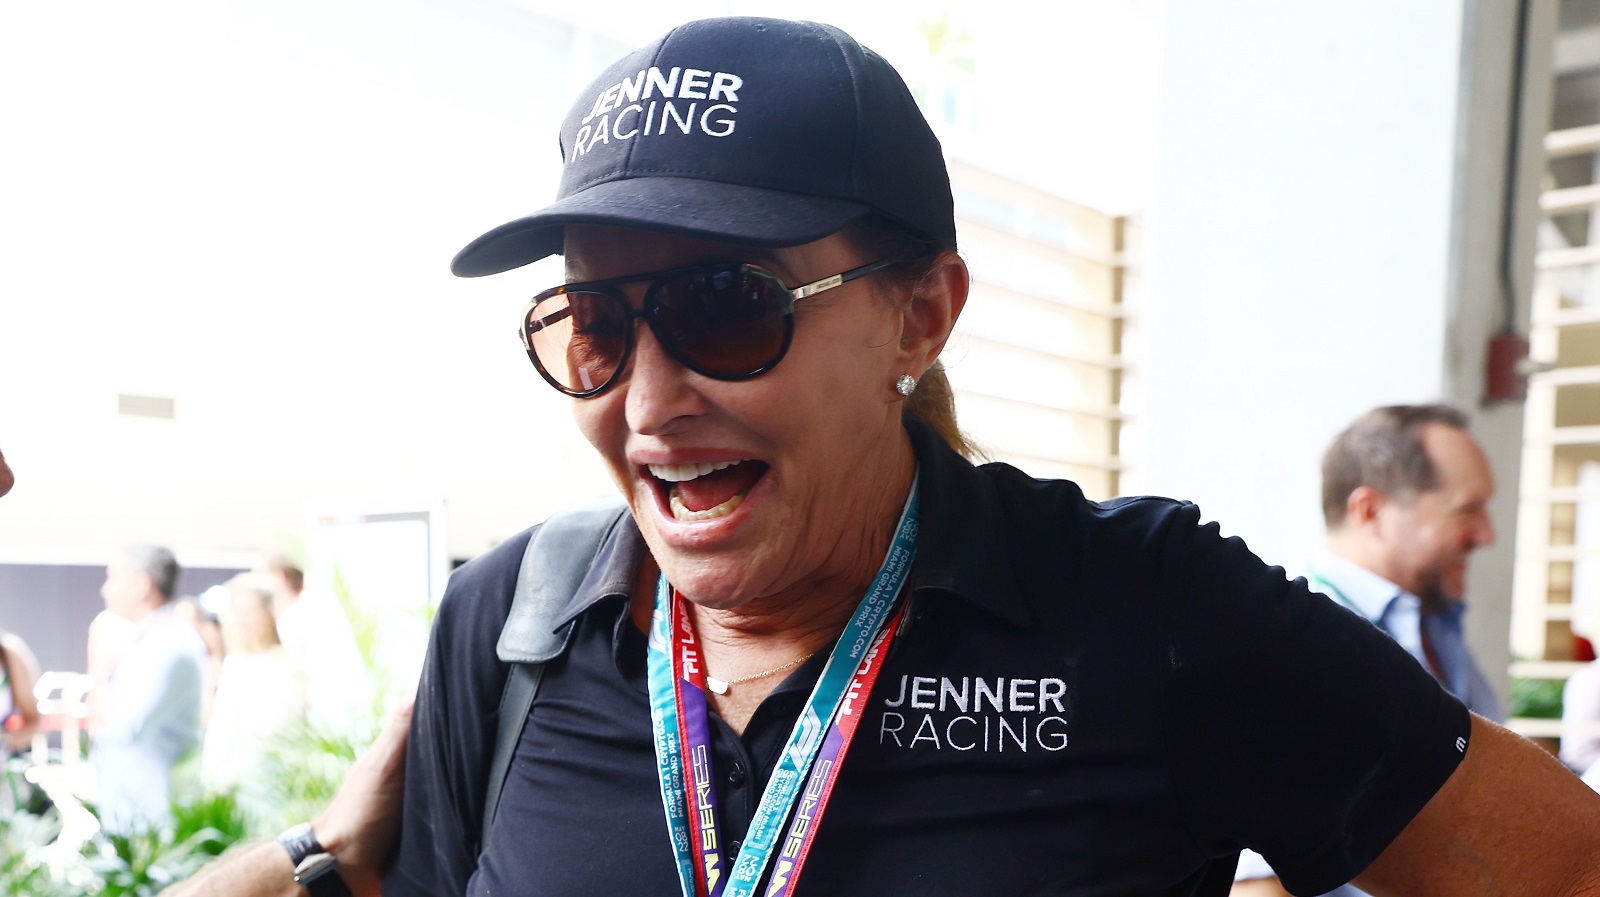 Caitlyn Jenner in the paddock prior to the Formula 1 Grand Prix of Miami on May 8, 2022.